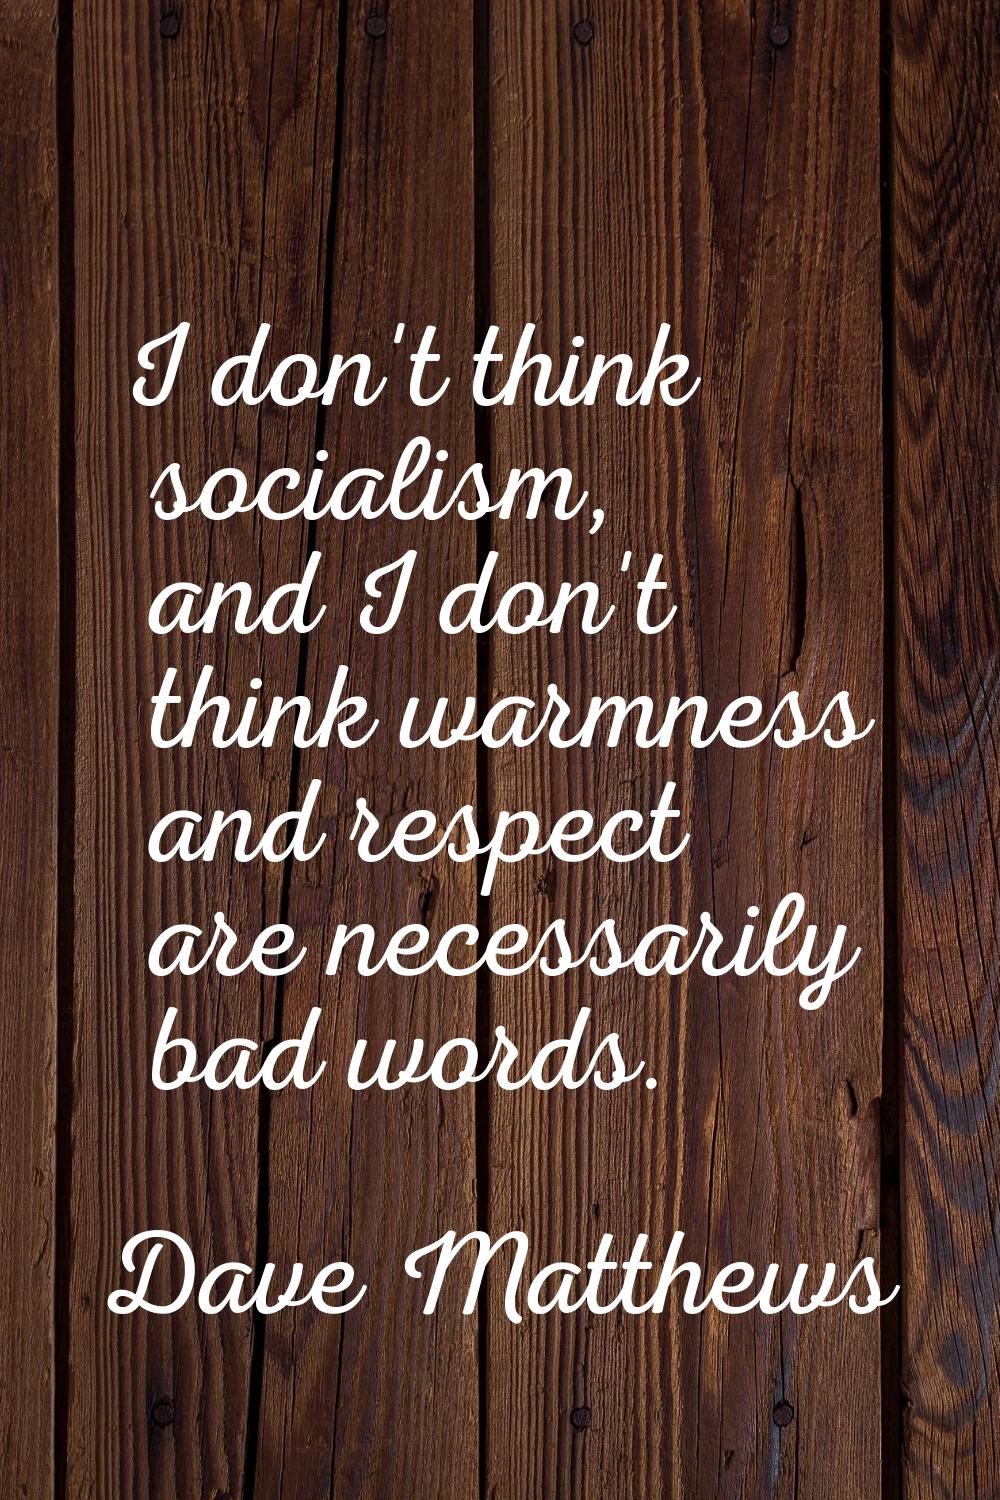 I don't think socialism, and I don't think warmness and respect are necessarily bad words.